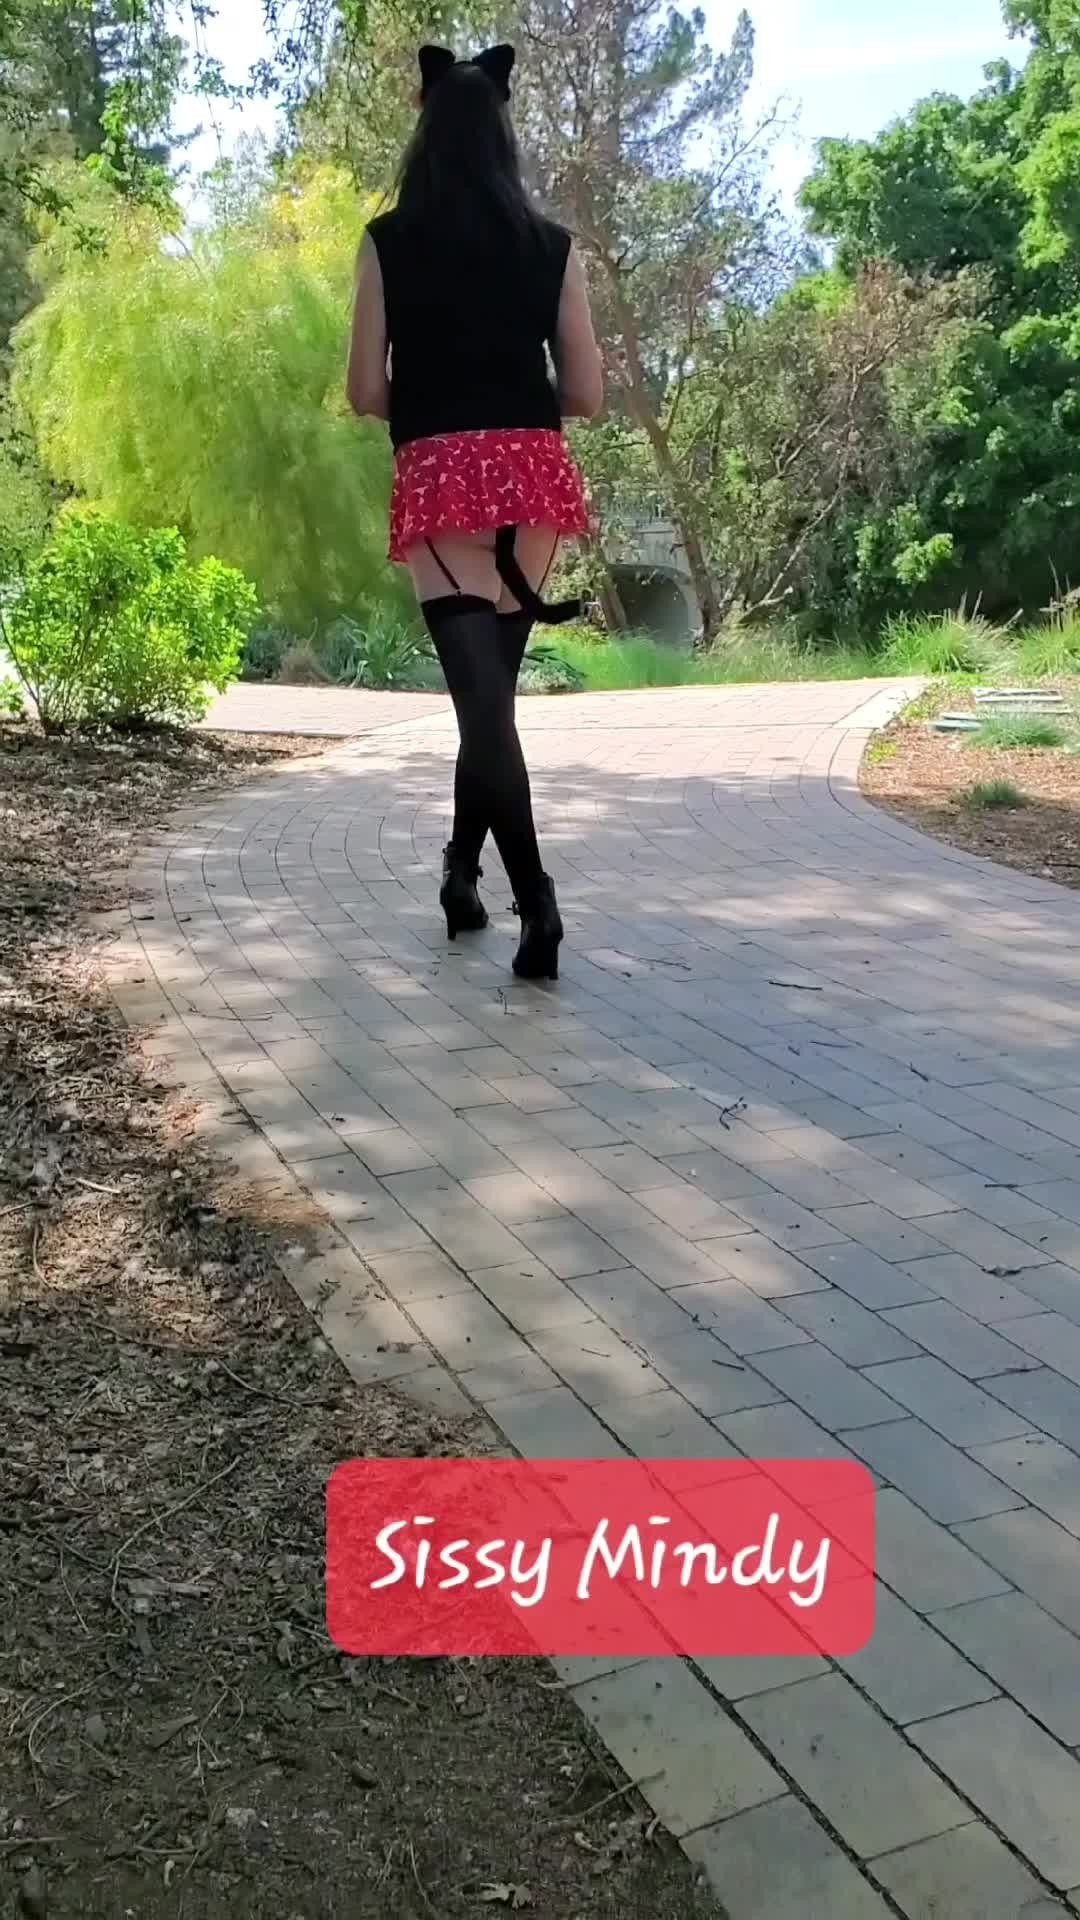 Video post by SissyMindy